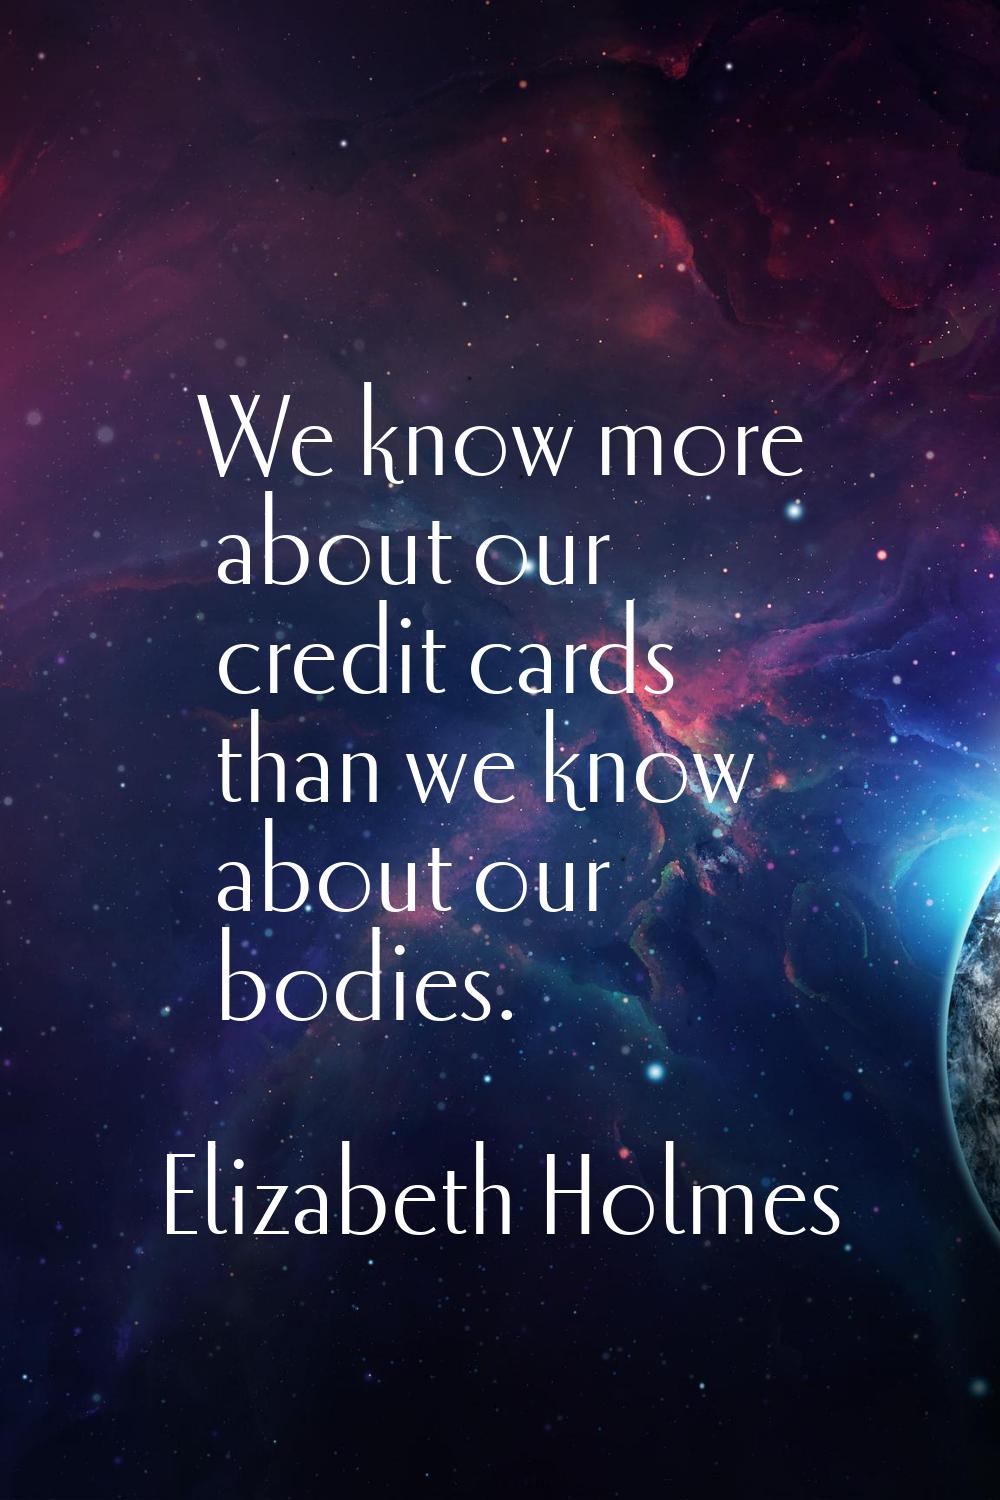 We know more about our credit cards than we know about our bodies.